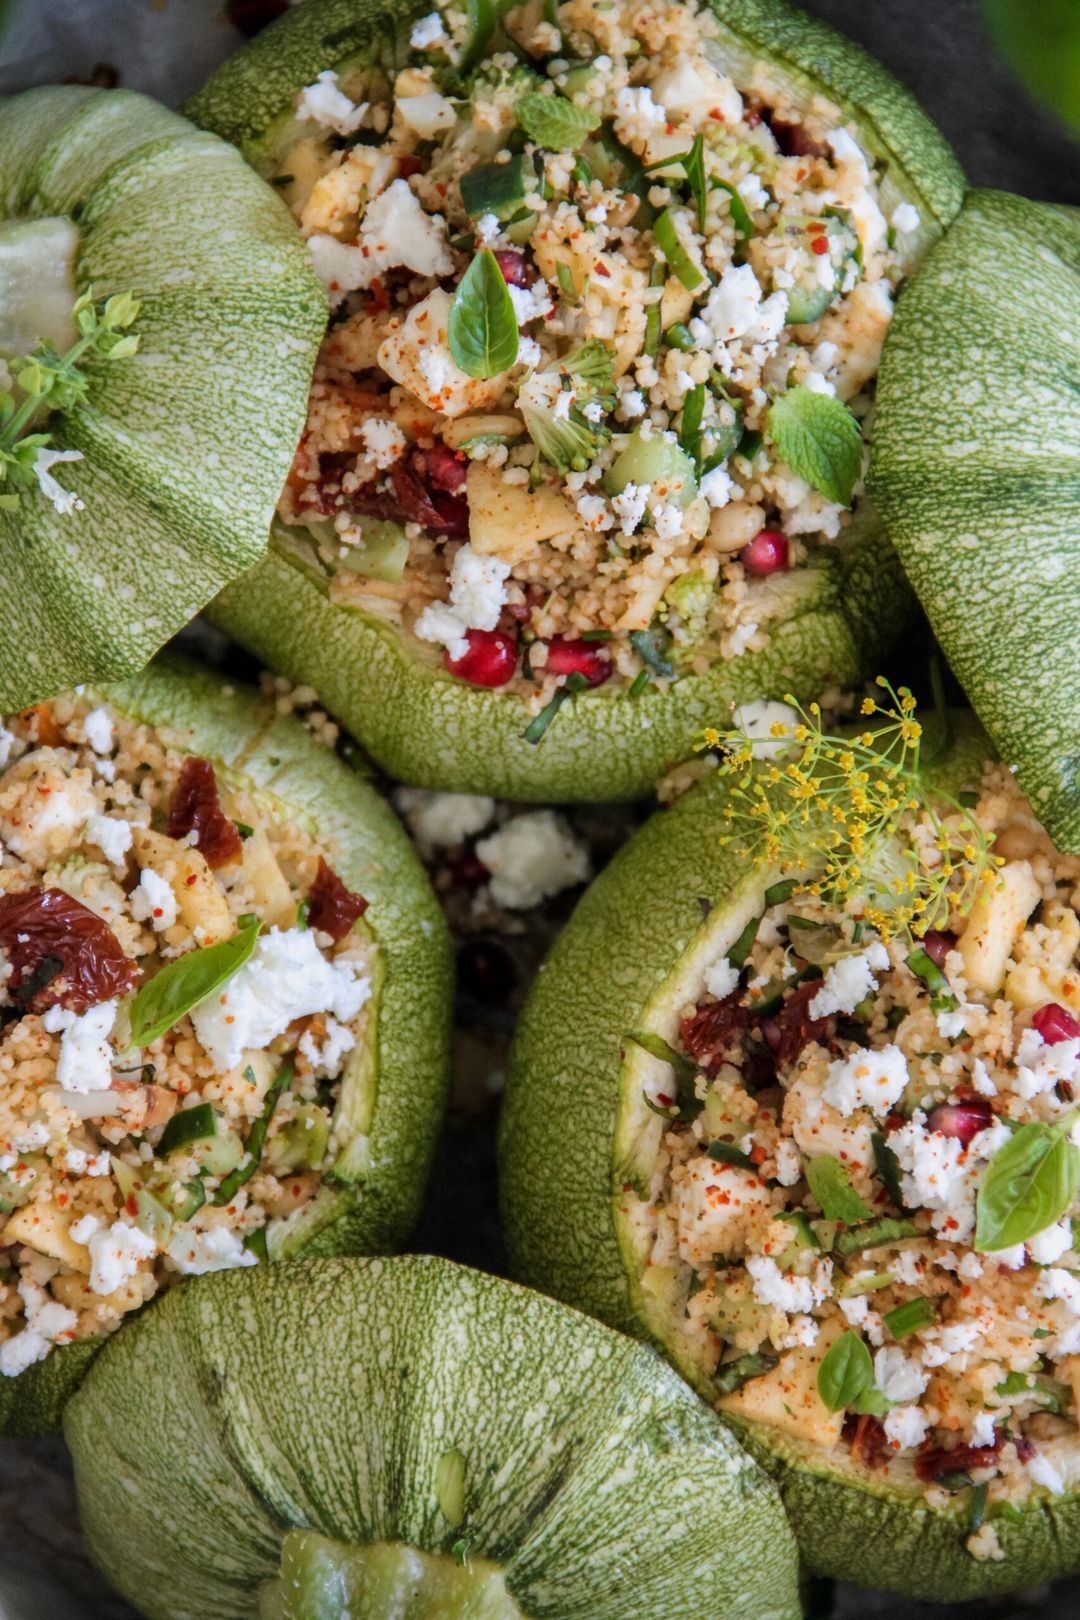 Stuffed courgettes with couscous salad